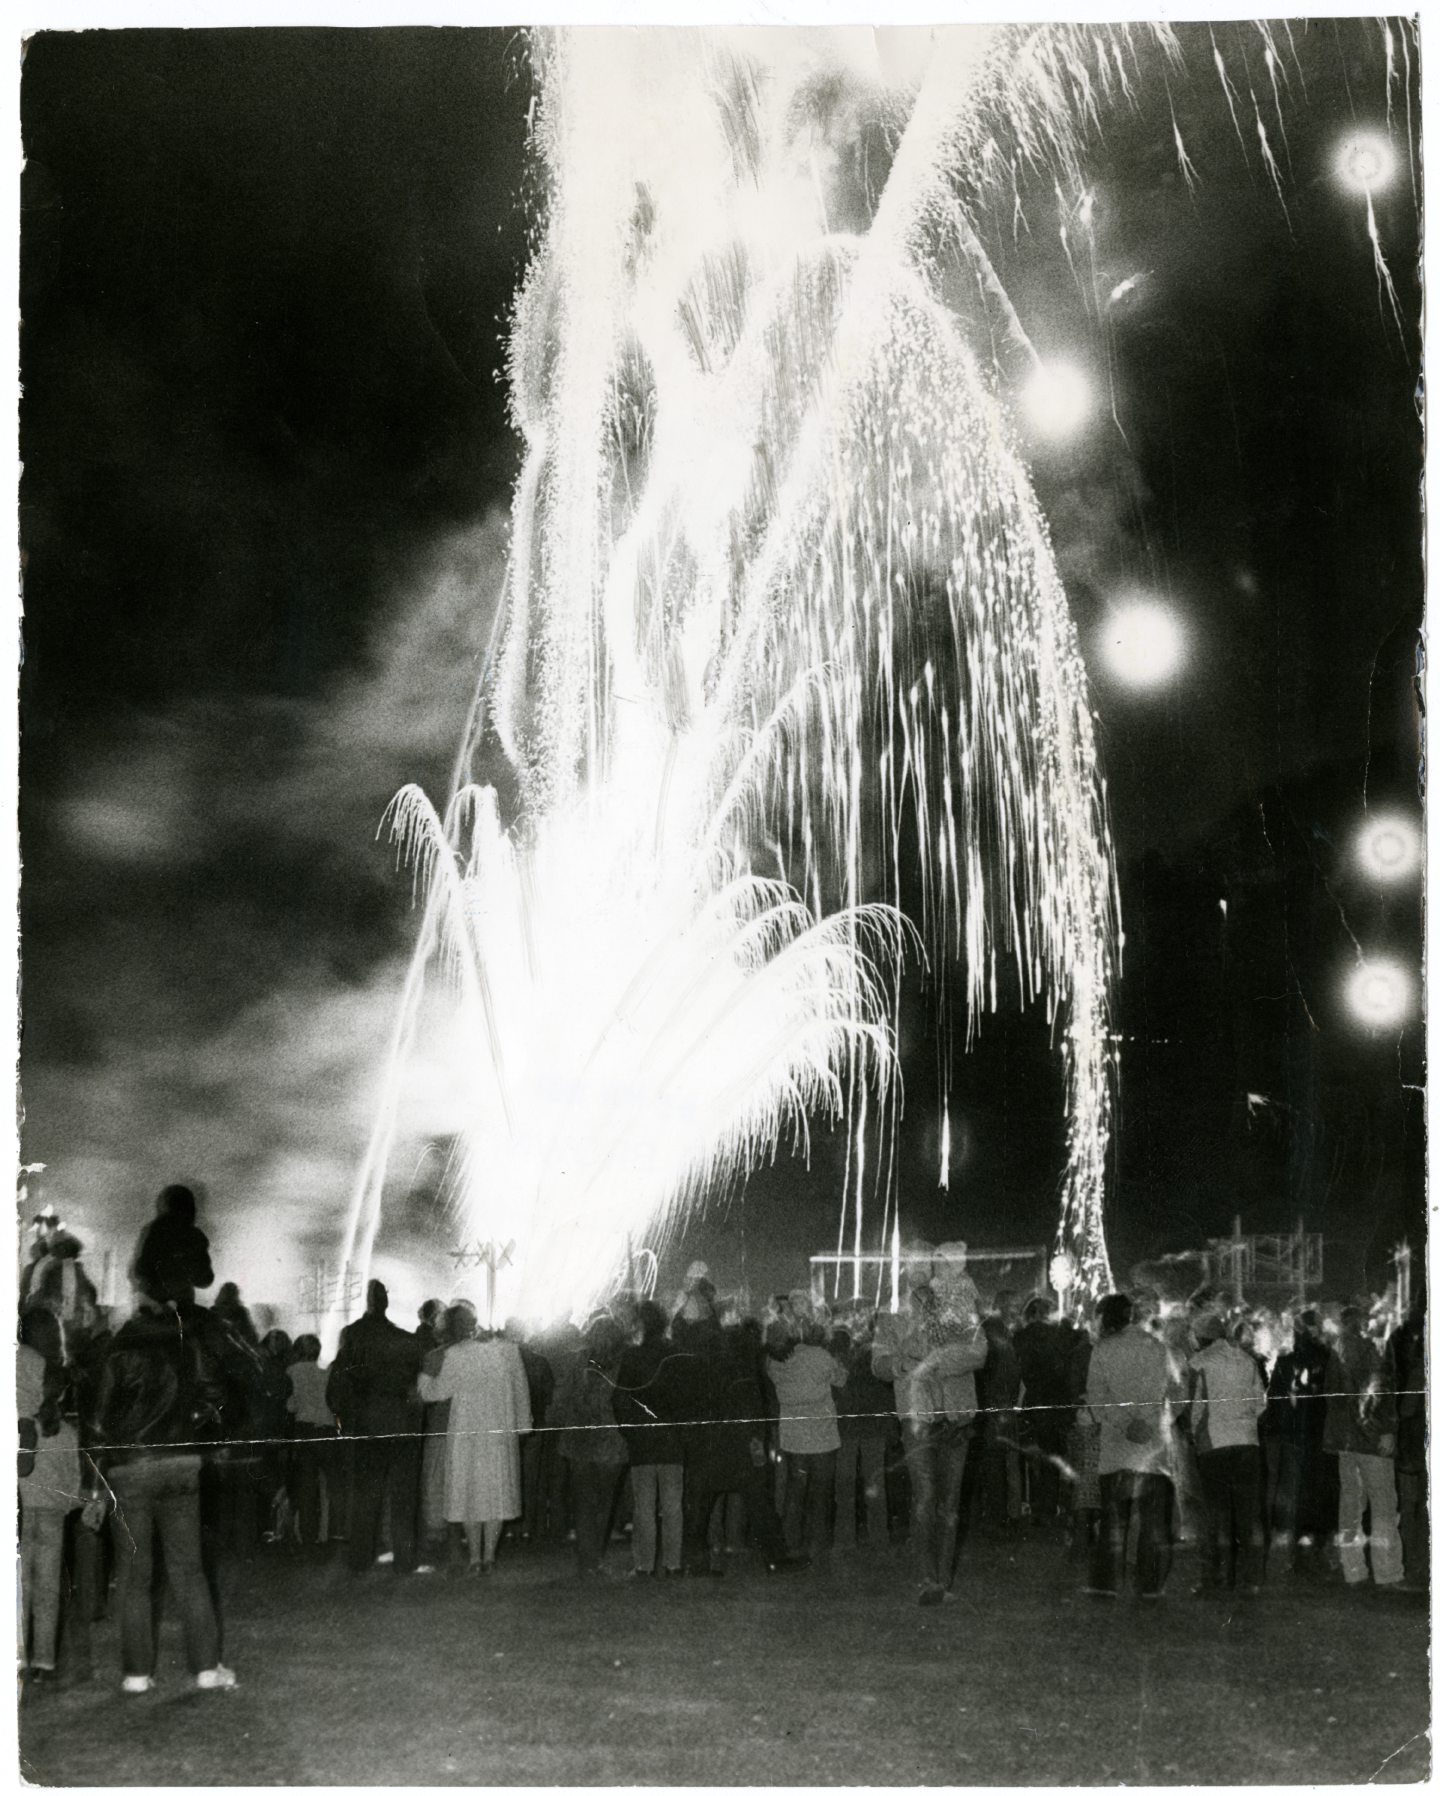 Lochee Park fireworks display in 1981. Image: DC Thomson.